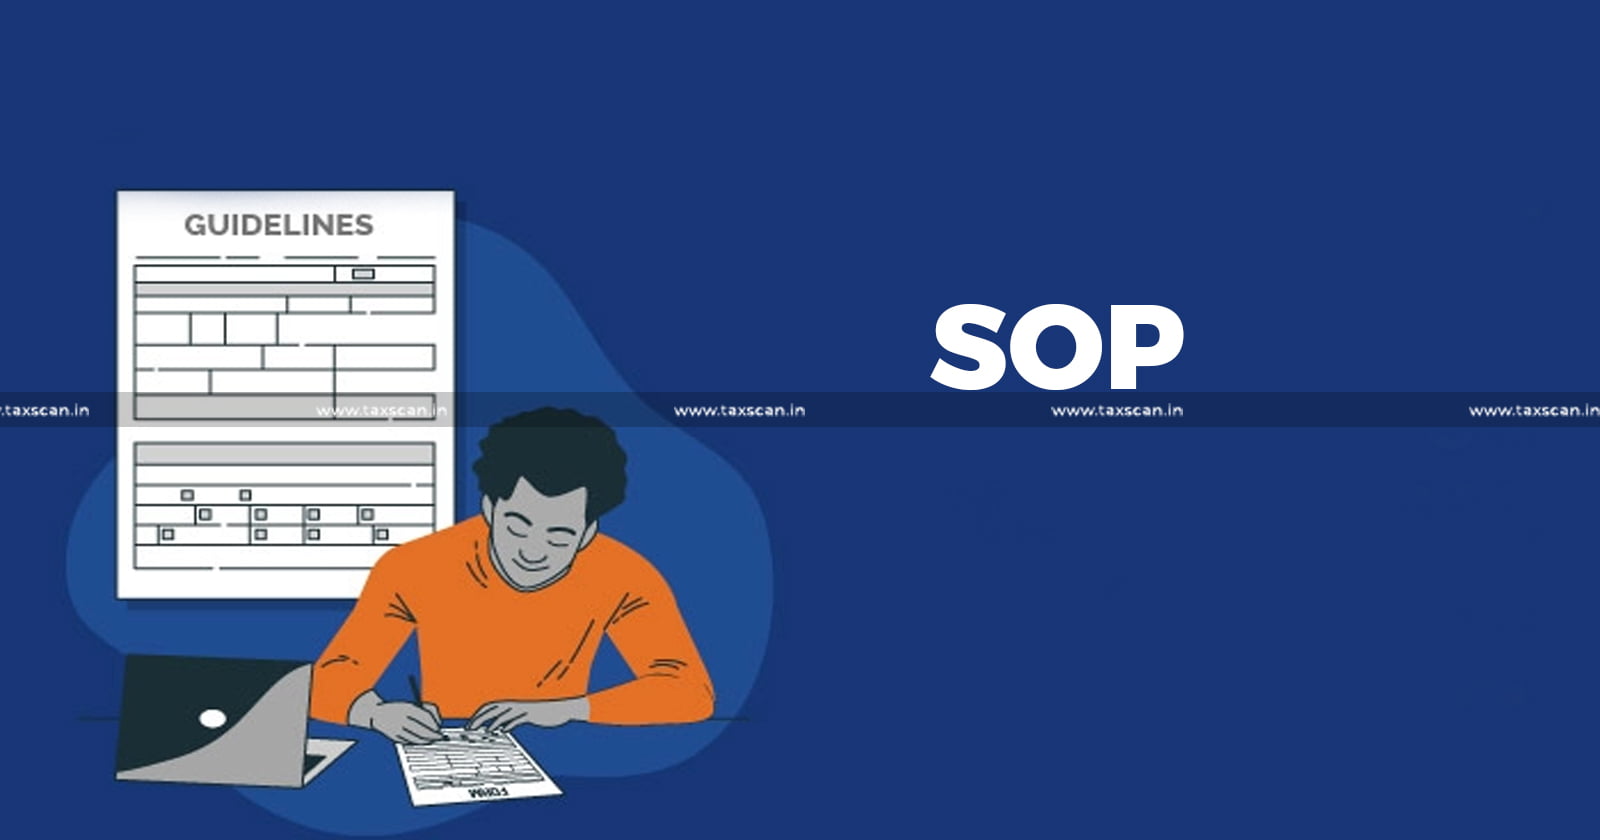 SOP Guidelines - SOP - CBDT - Unlisted Scrips - ITAT - Revision Order - Income Tax - Tax - Taxscan